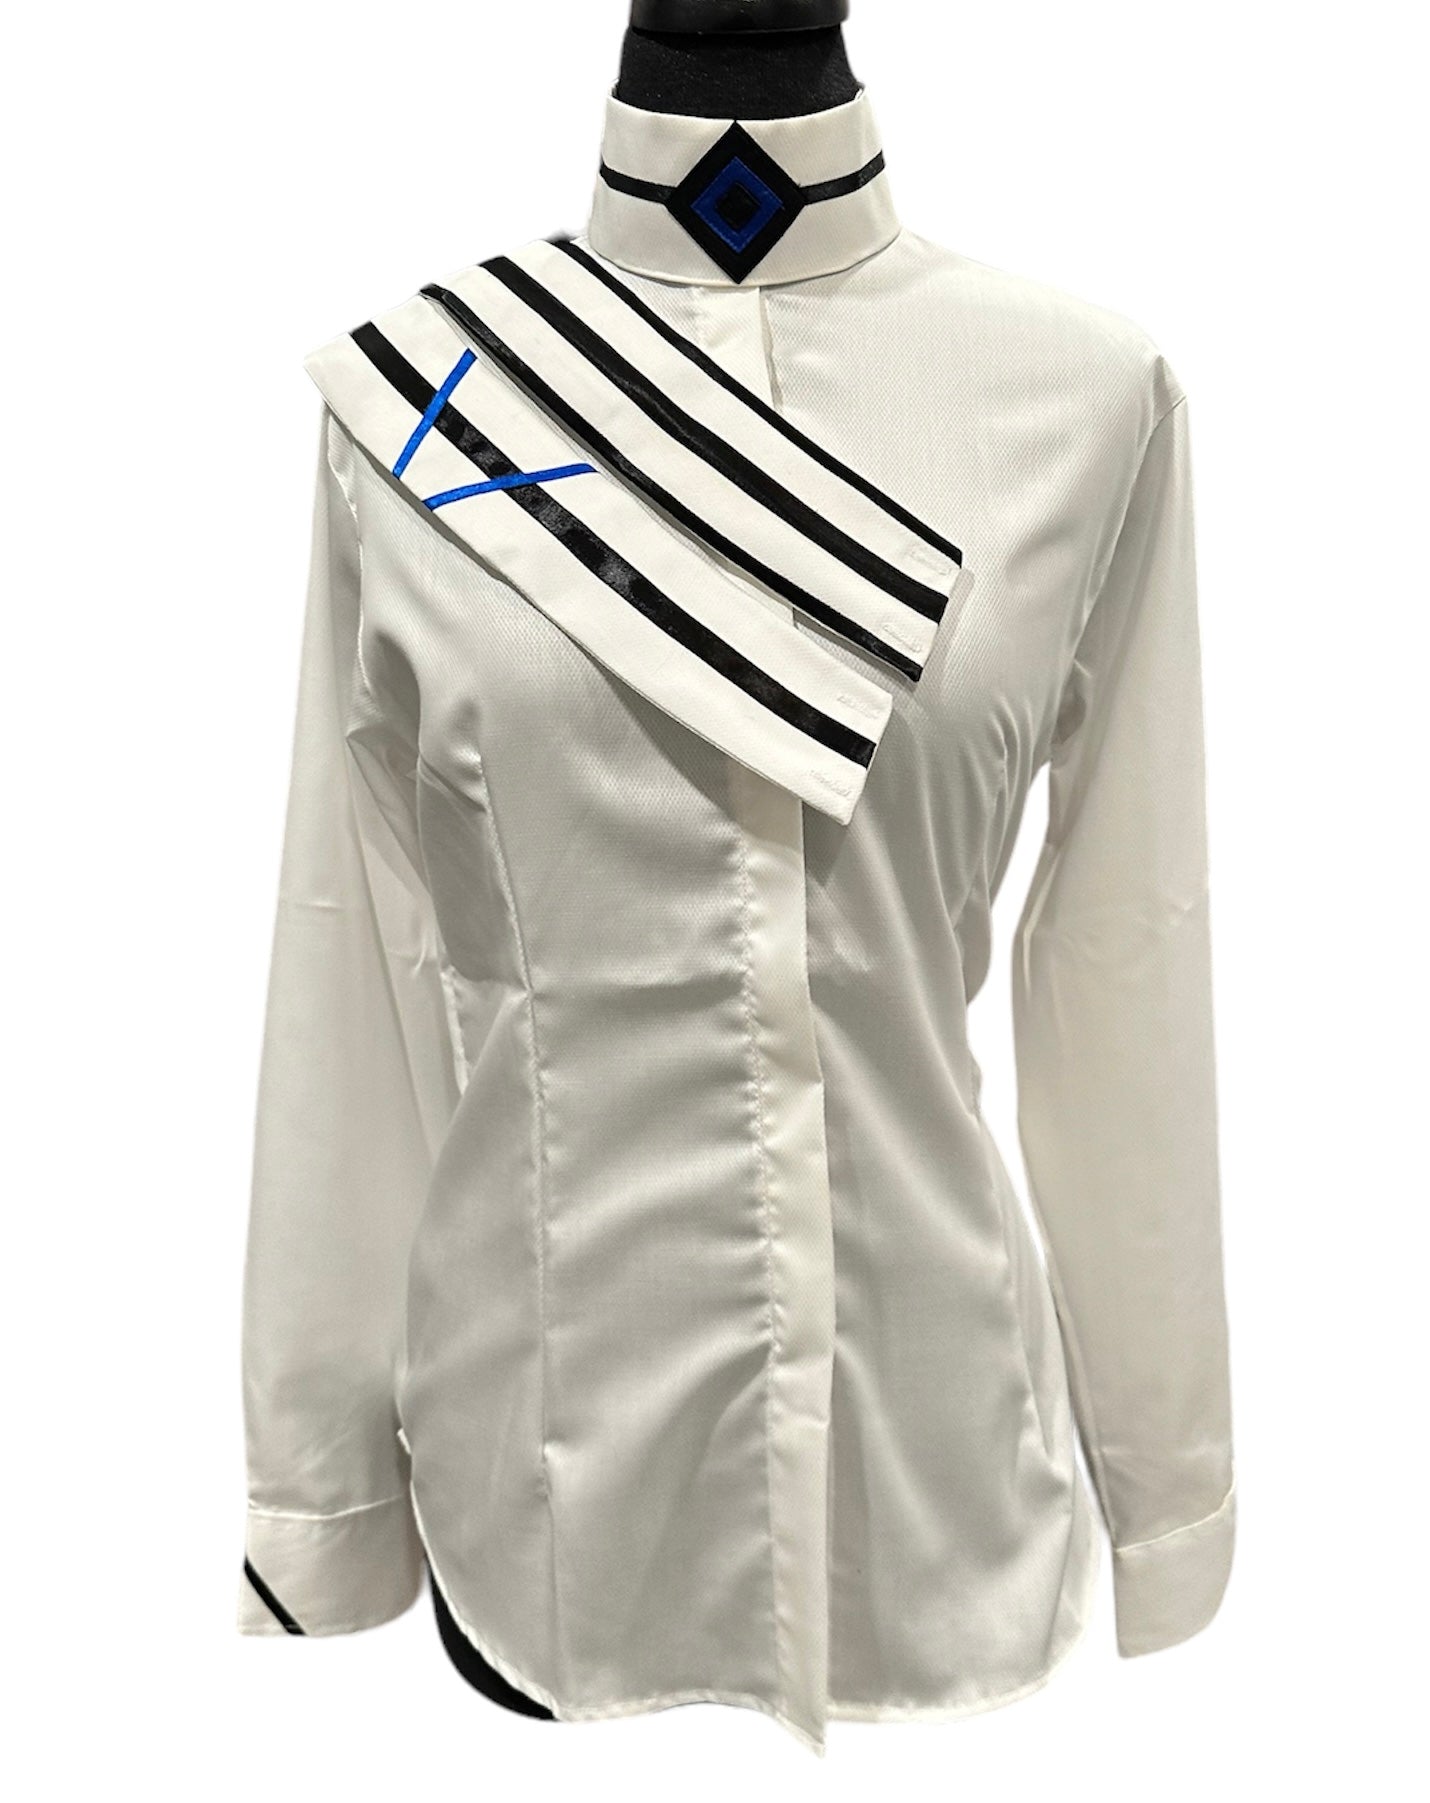 English Show Shirt White with Royal and Black Fabric Code V38